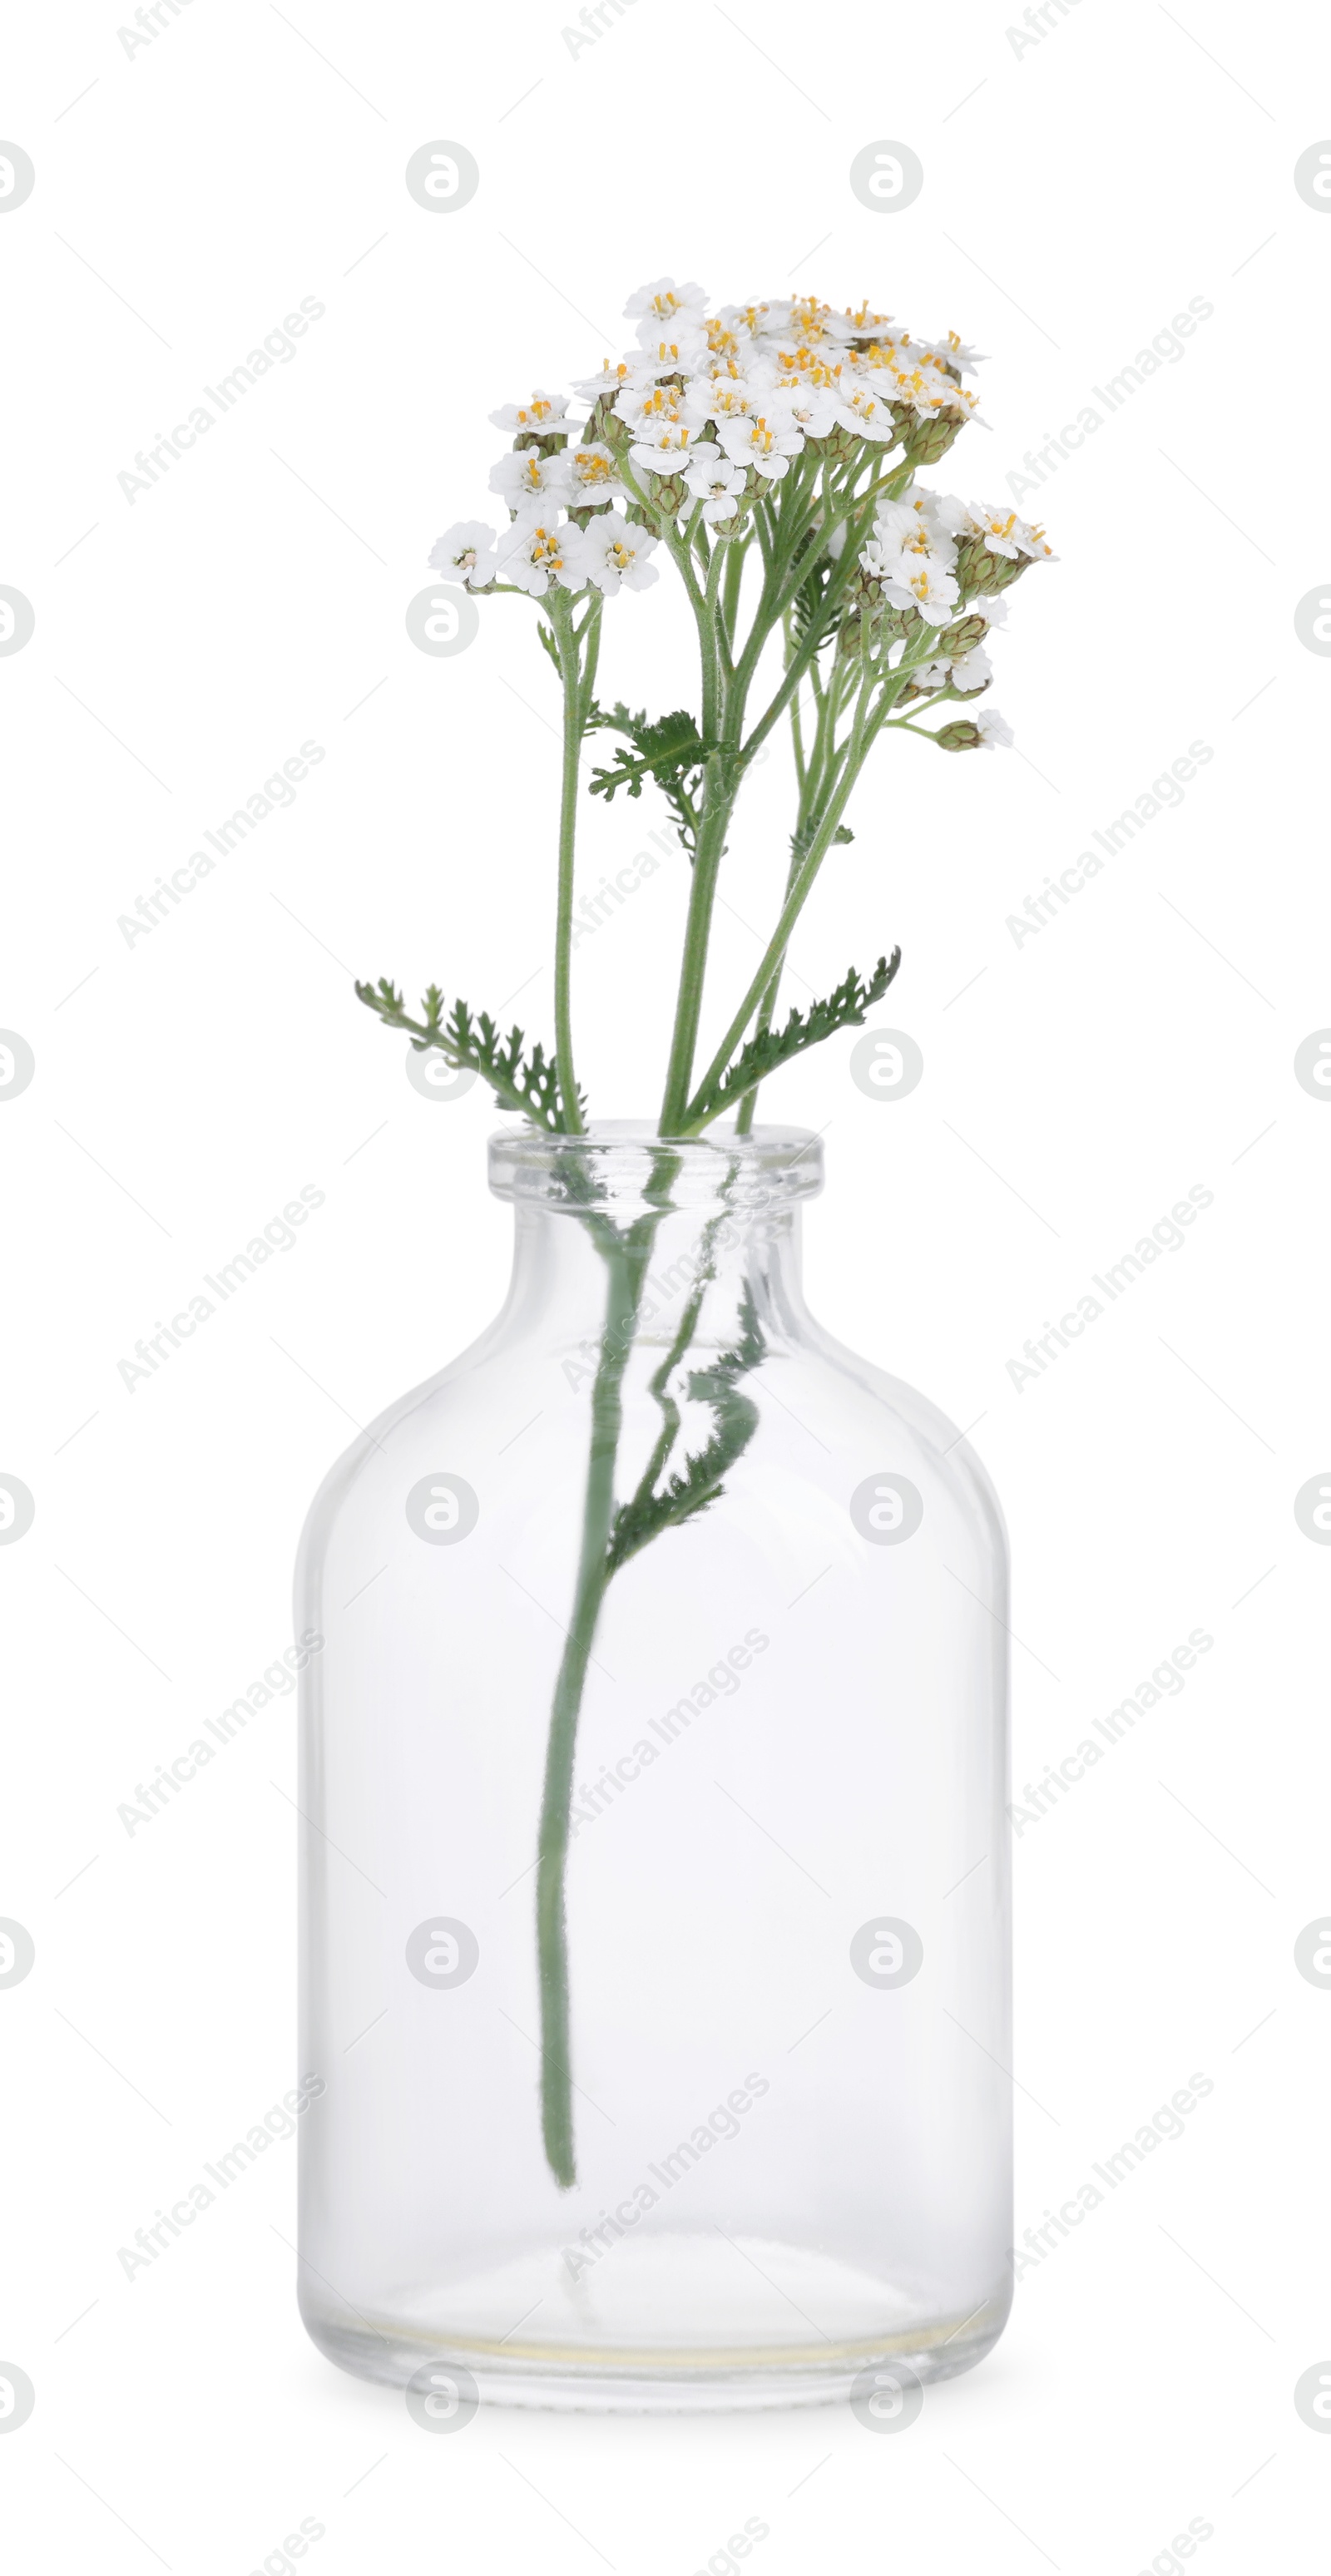 Photo of Yarrow flowers in glass bottle isolated on white